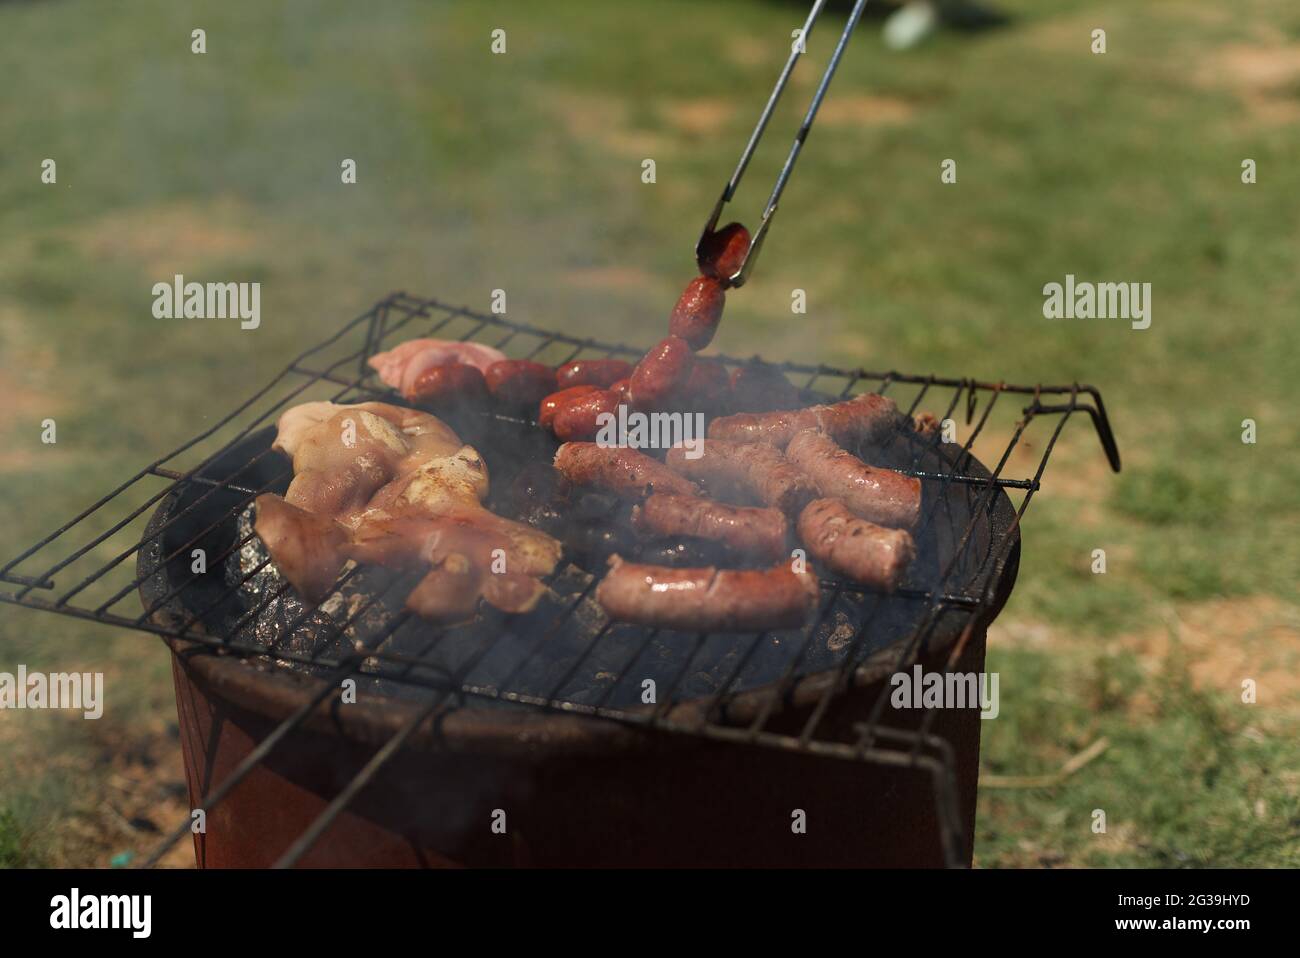 BBQ day in the garden. Stock Photo